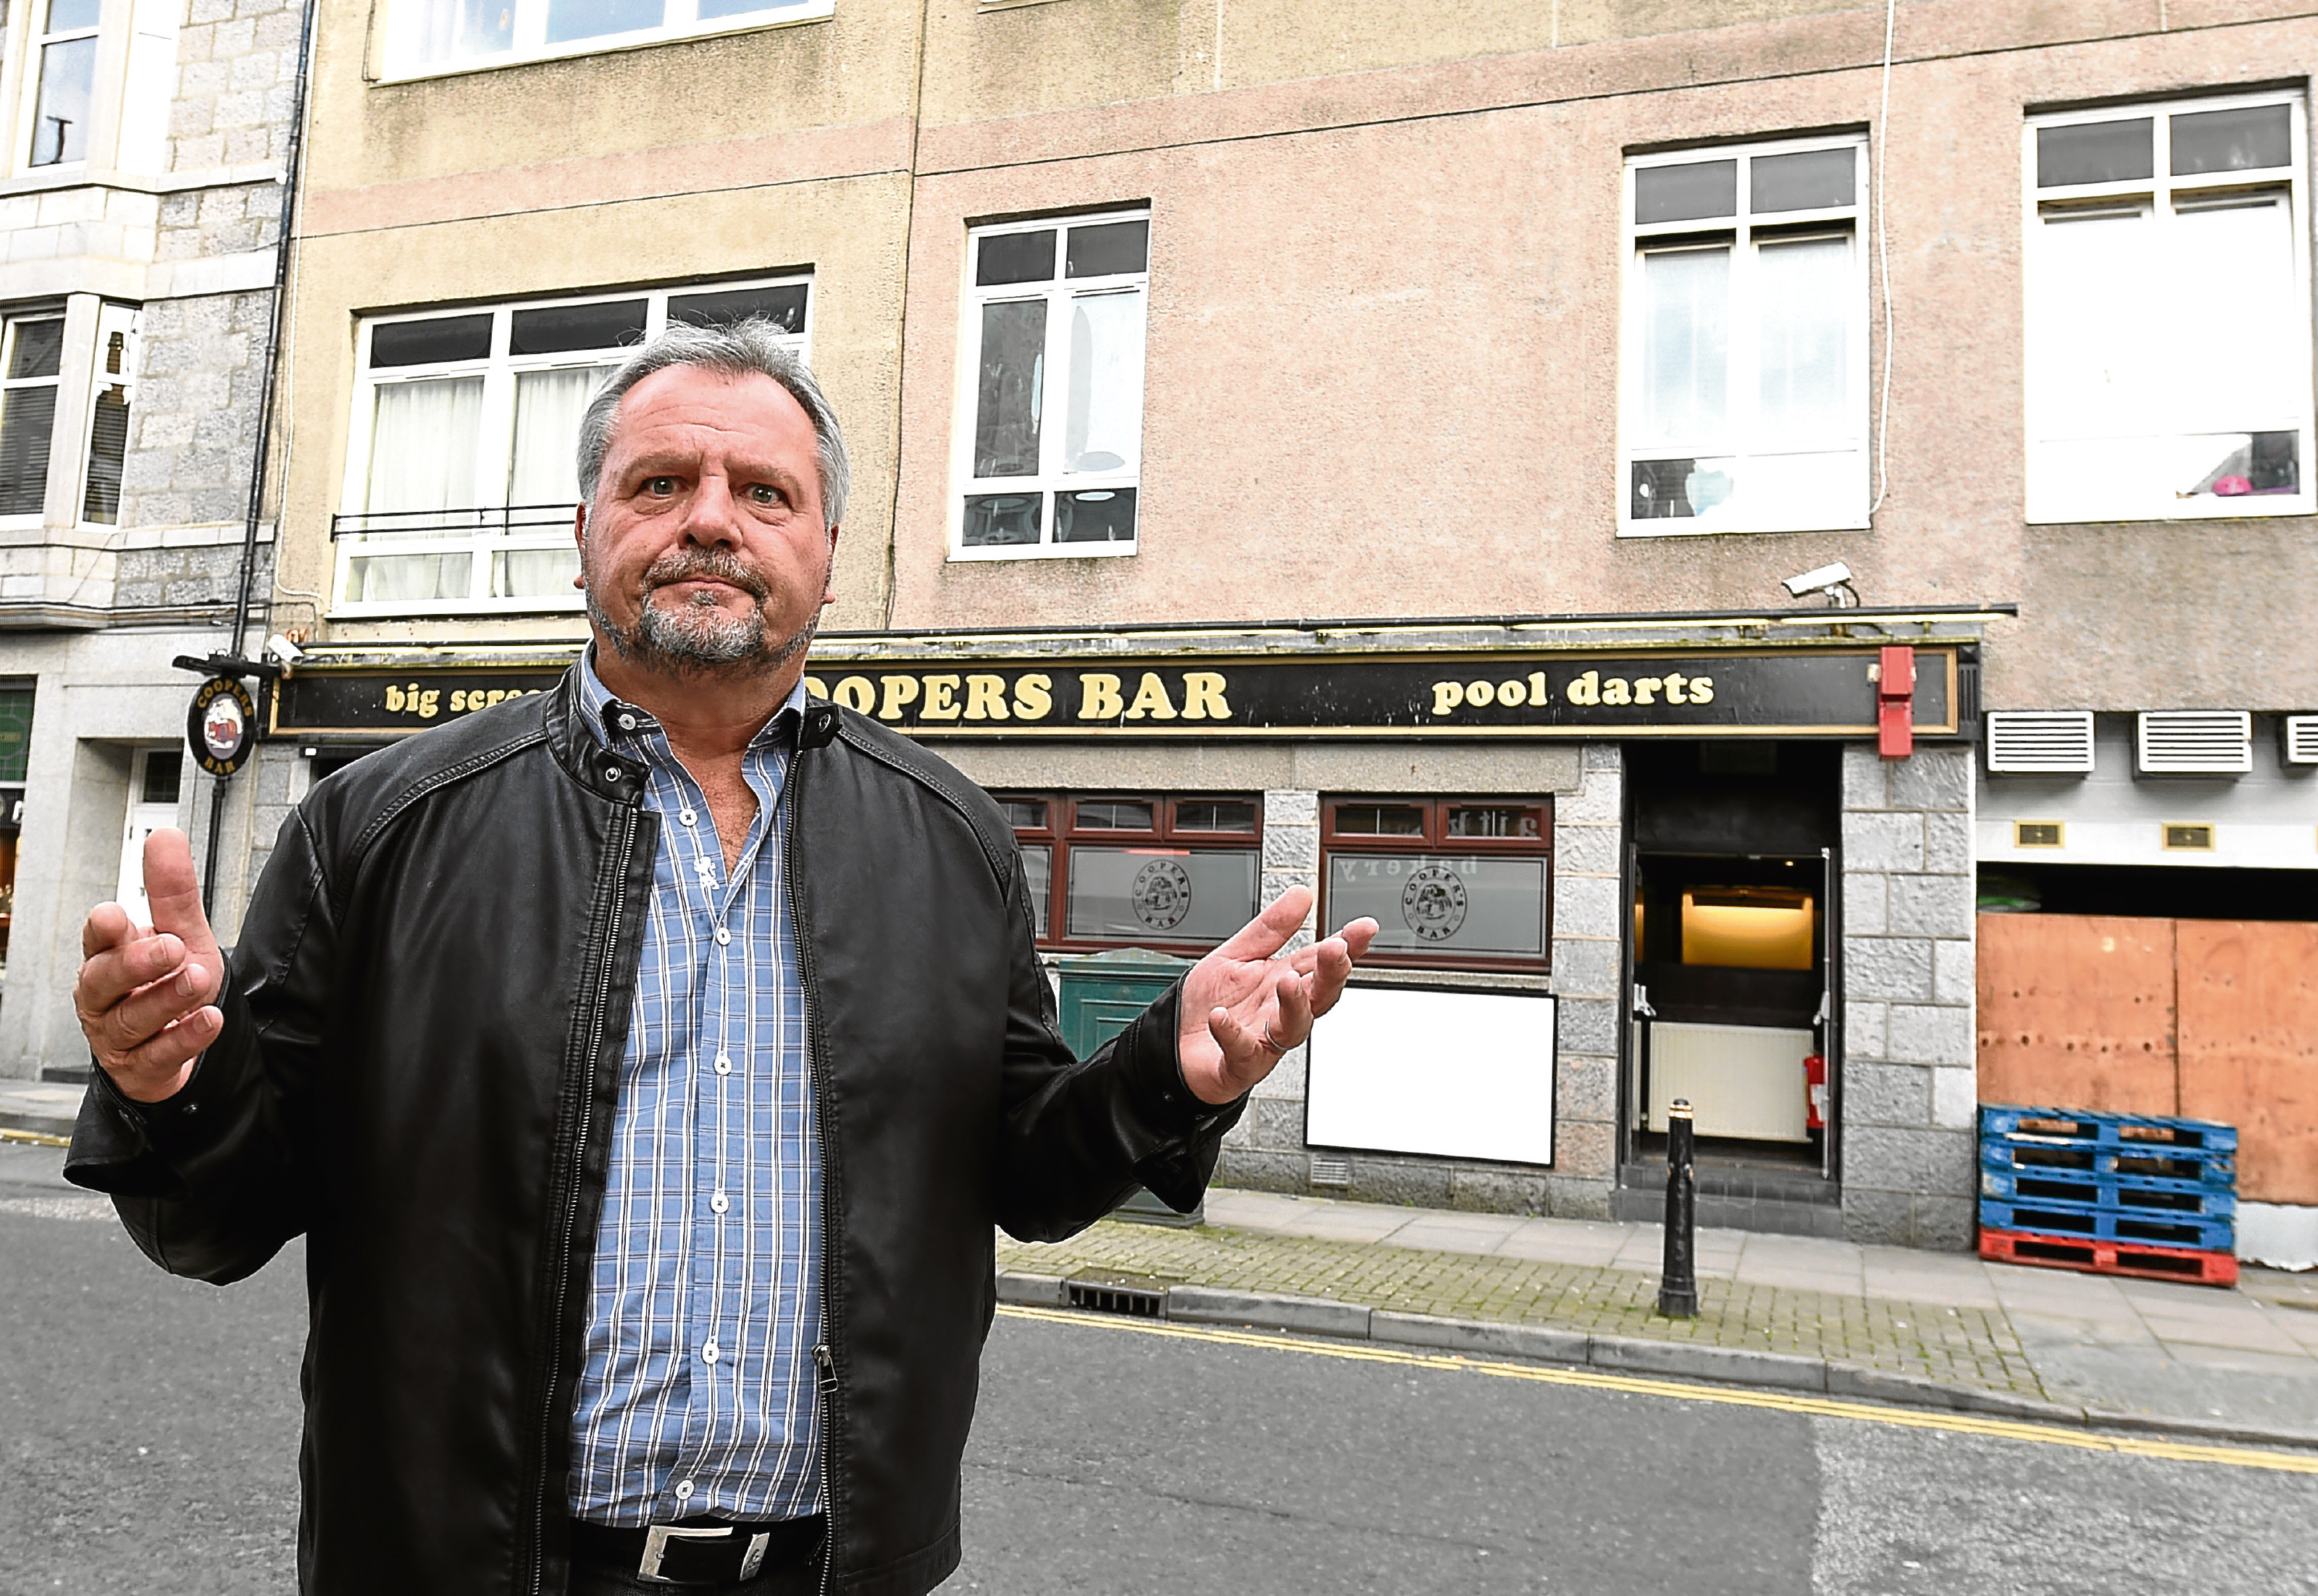 Bob Baxter, the director of Coopers Bar